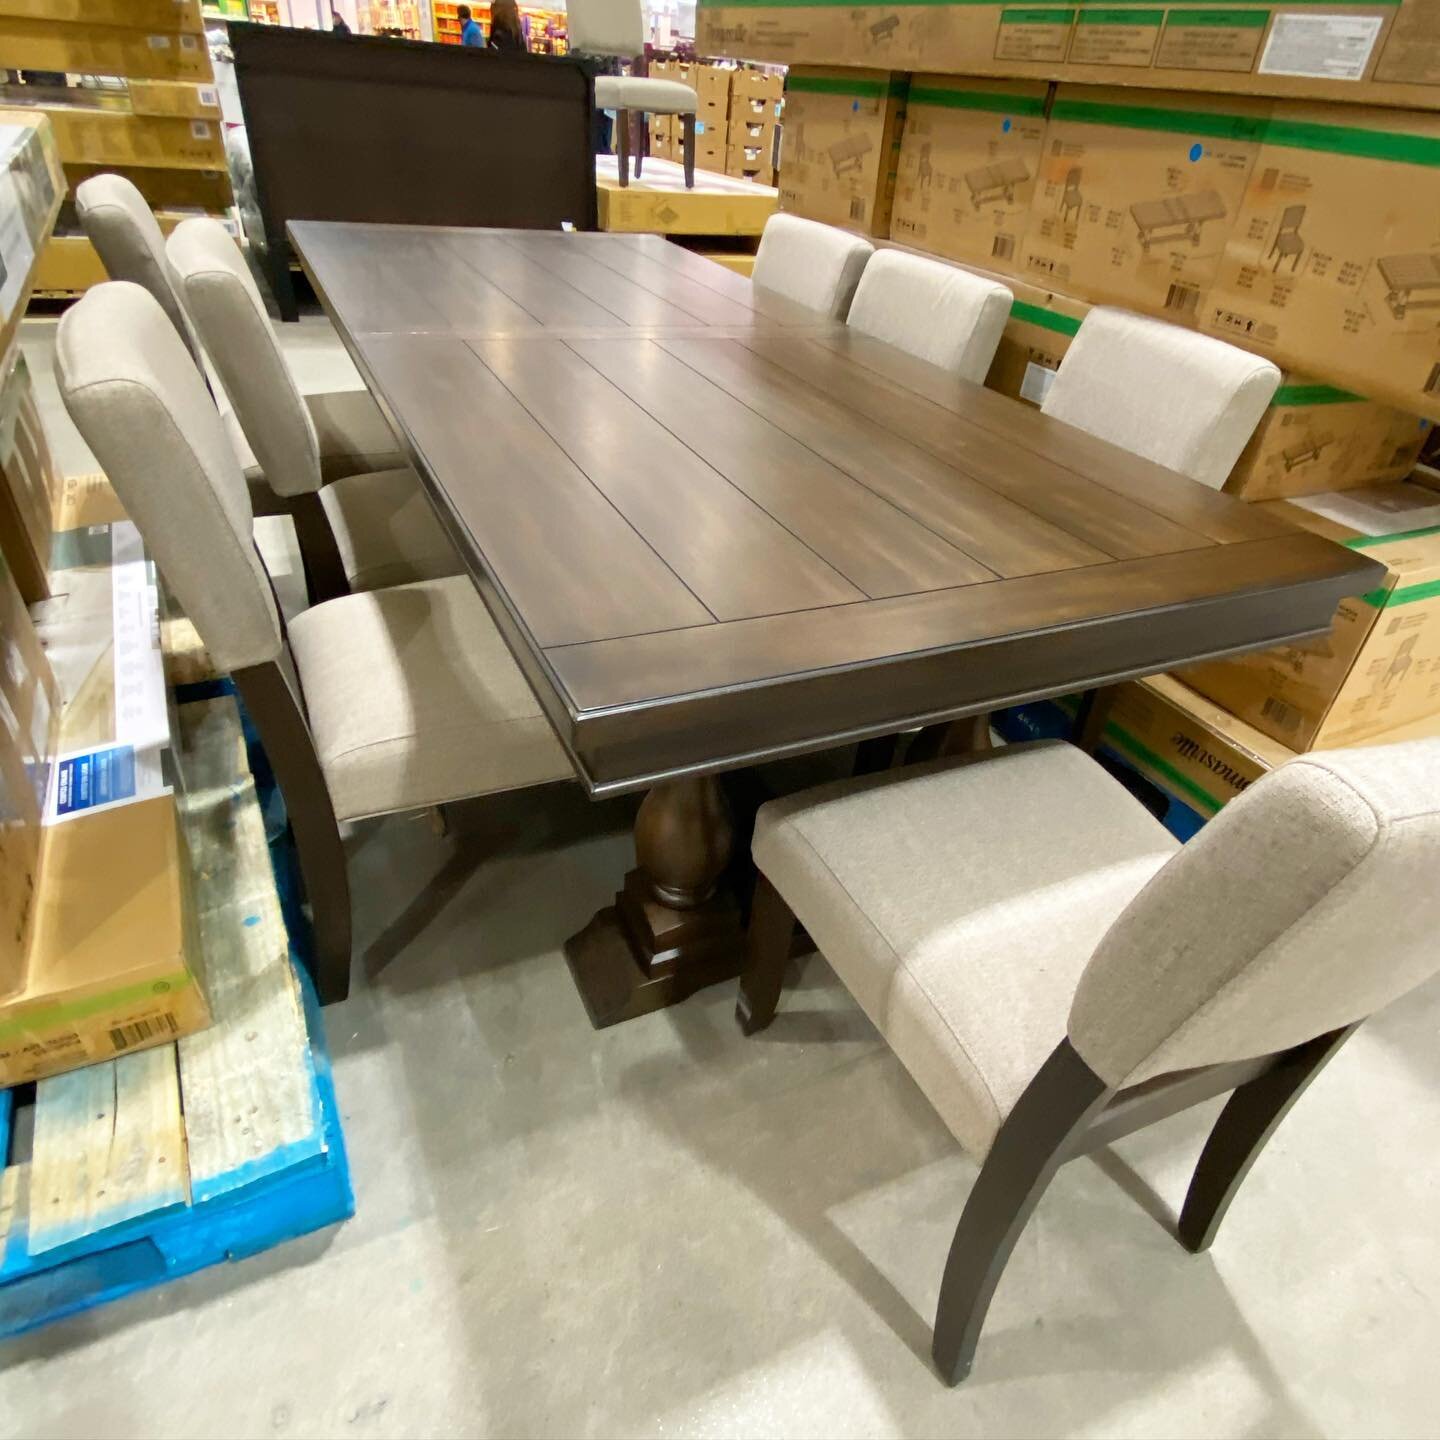 9PC Dining Set from @thomasvilleofficial - this is beautiful set with 8 dining chairs and table with extender. I shared the dimensions in the fourth photo! Price $1299.99 📍Barrie 
#costco #costcofindscanada #costcofinds #costcohaul #costcobuys #cost